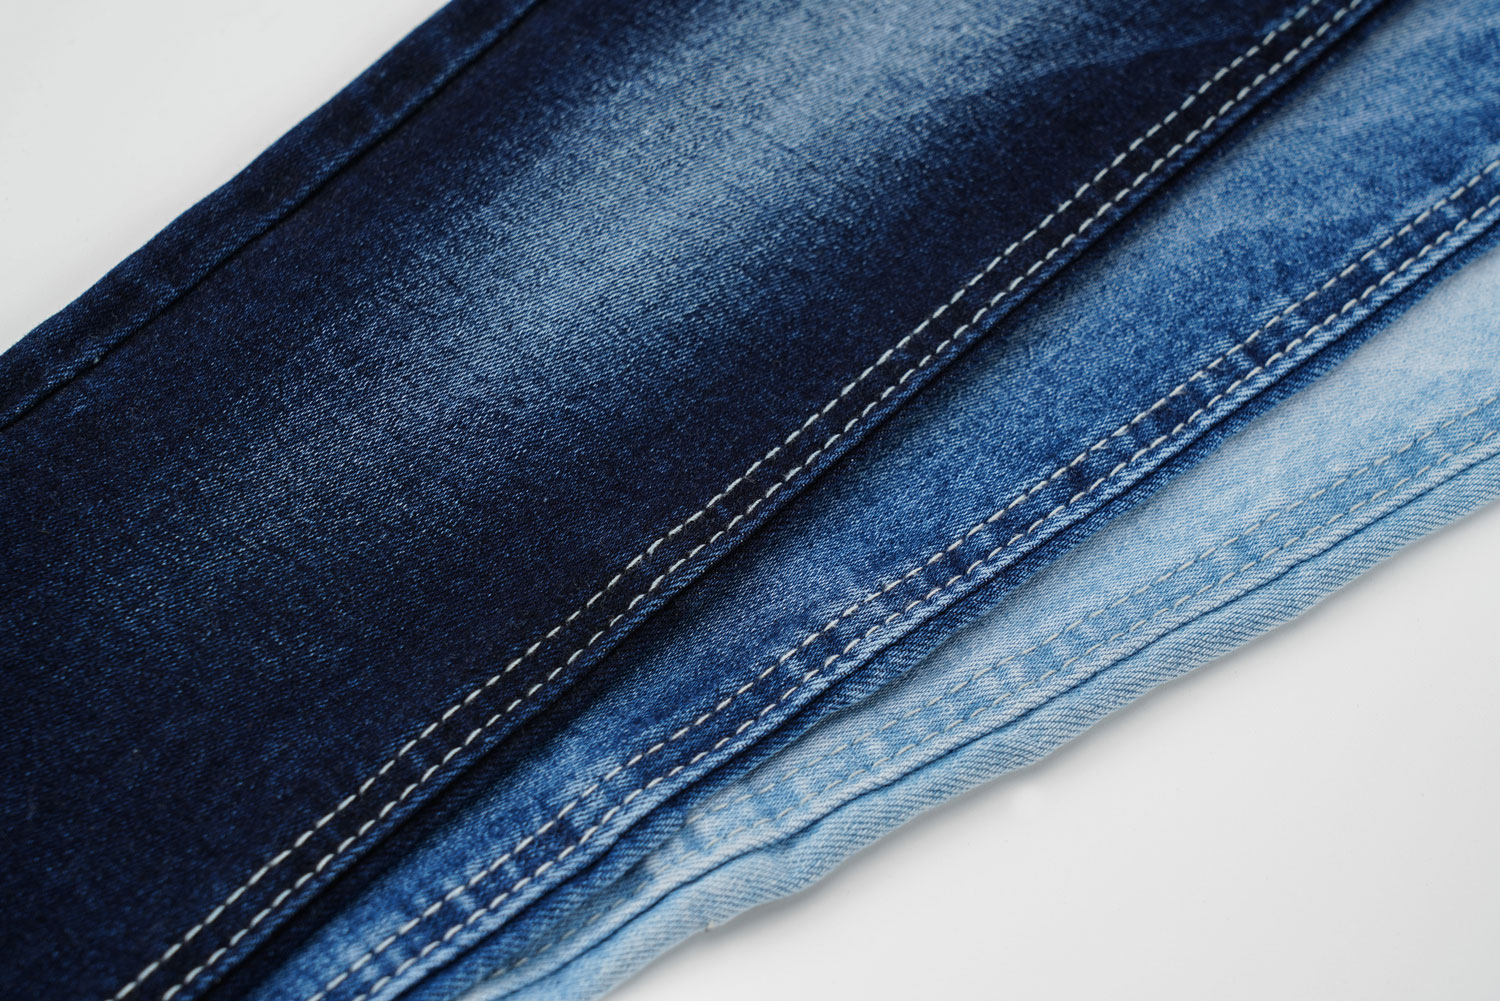 How to Choose the Right Quality Denim 2